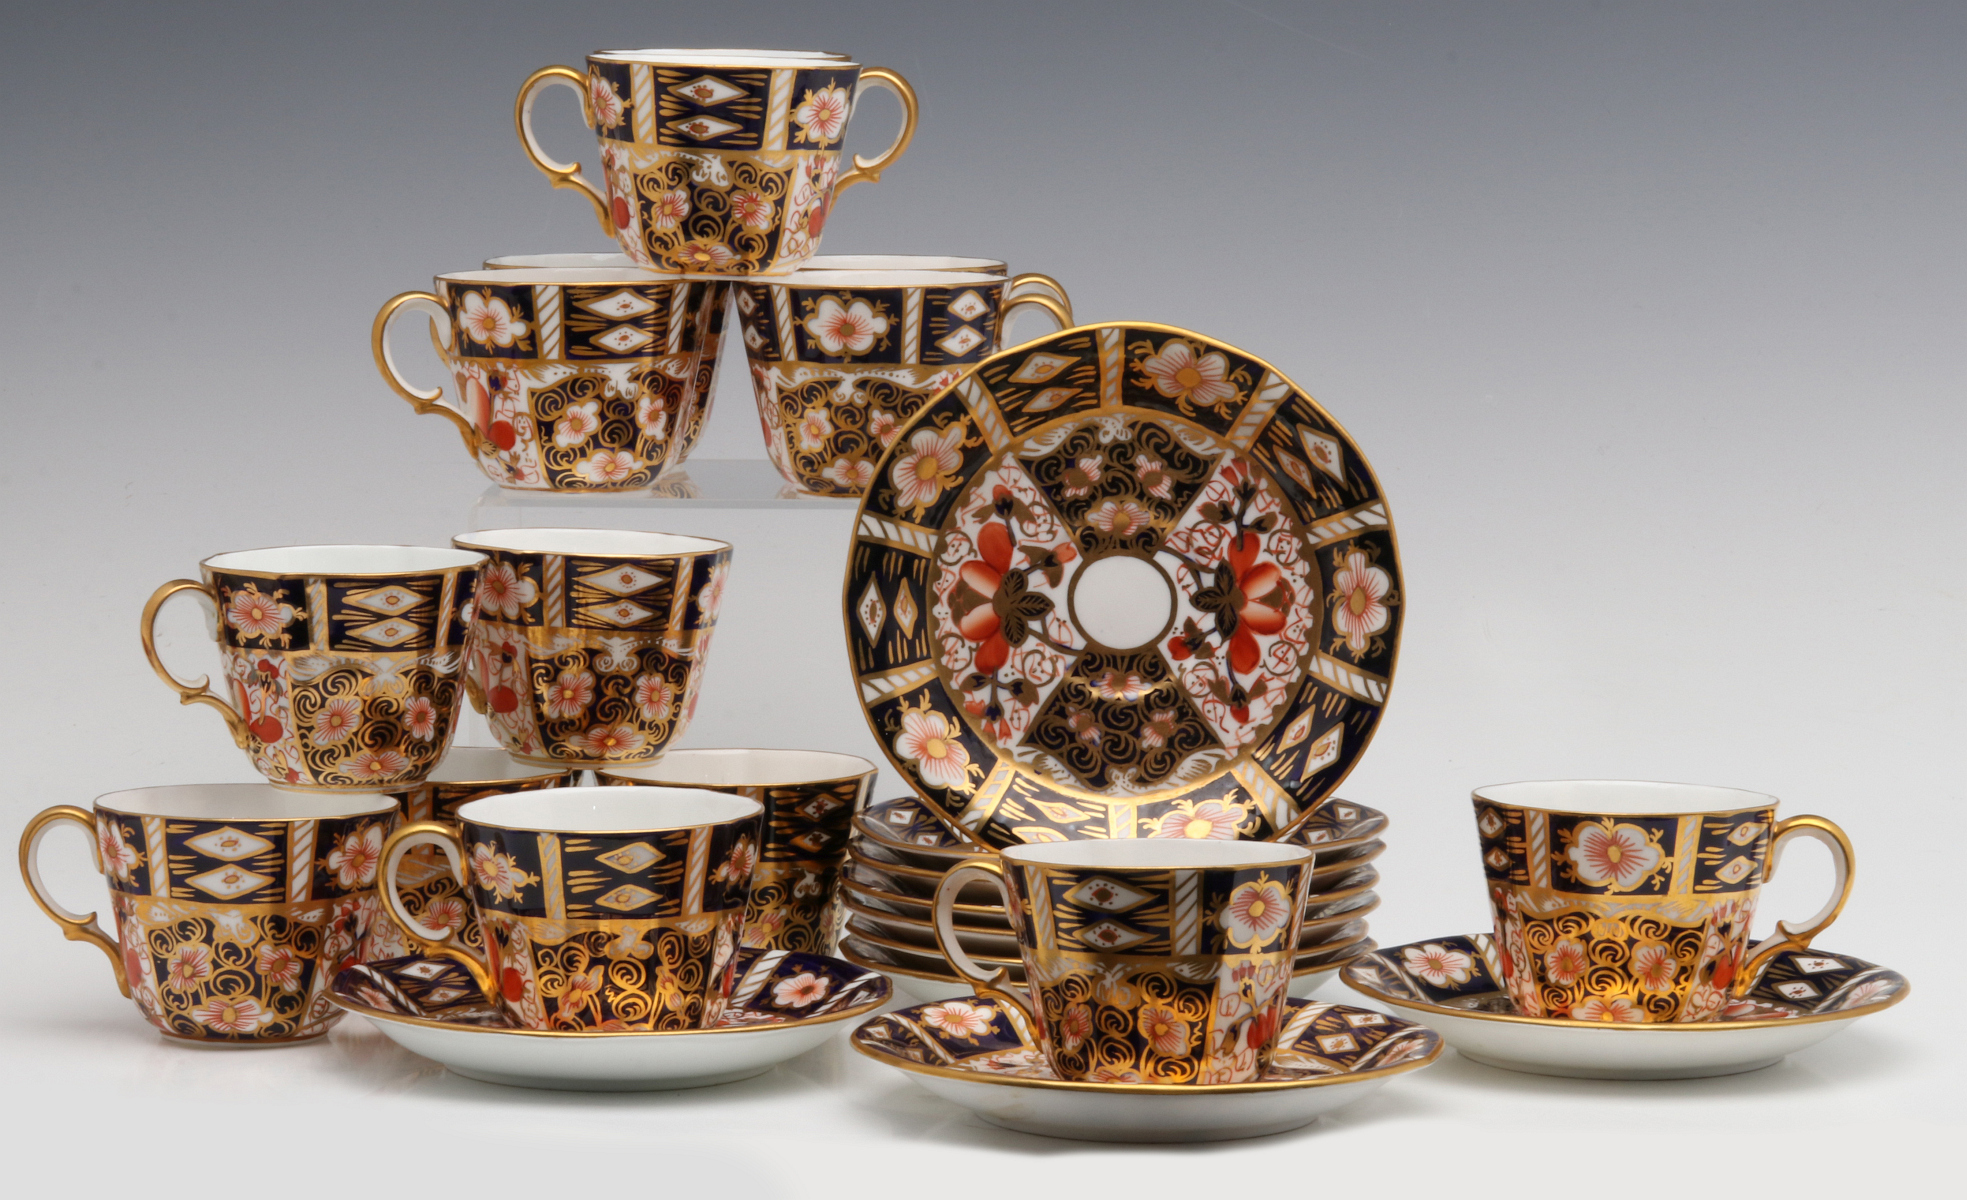 ROYAL CROWN DERBY 'TRADITIONAL IMARI' CUP/SAUCER SETS